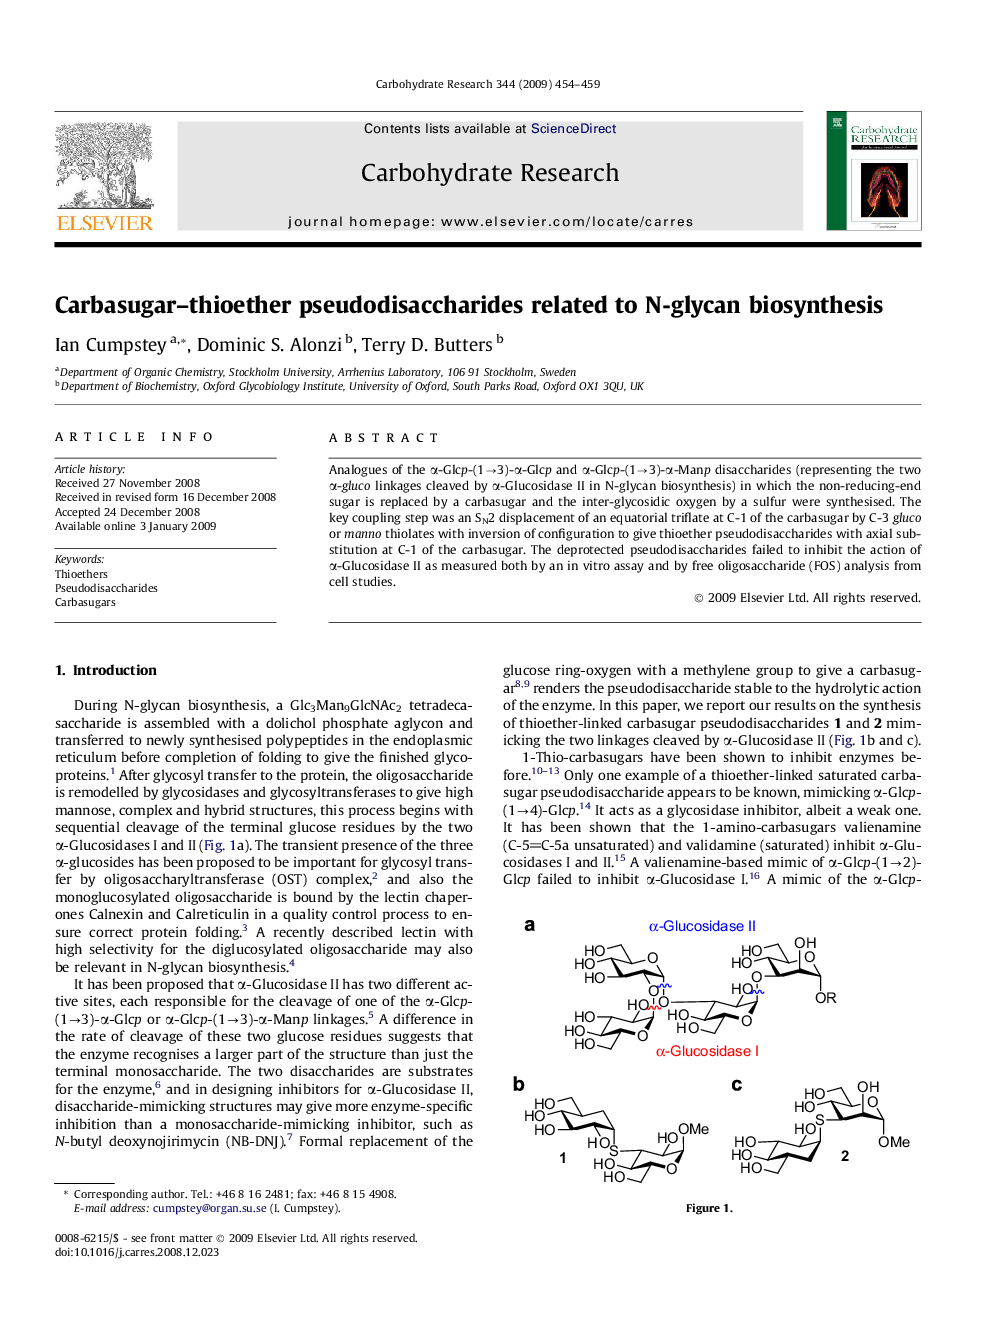 Carbasugar–thioether pseudodisaccharides related to N-glycan biosynthesis